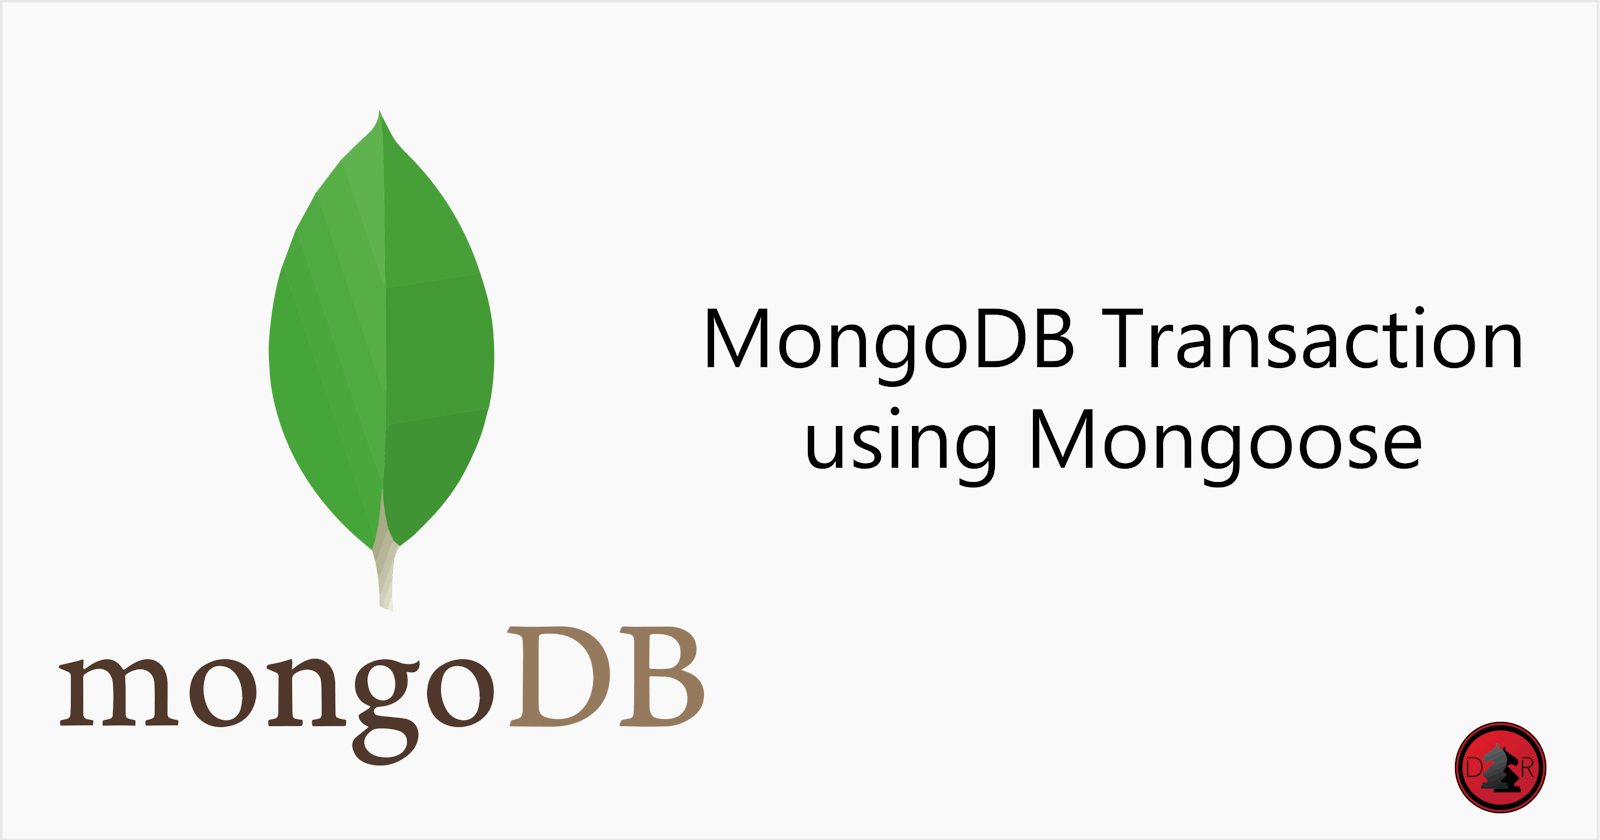 How to Implement Transaction using Mongoose